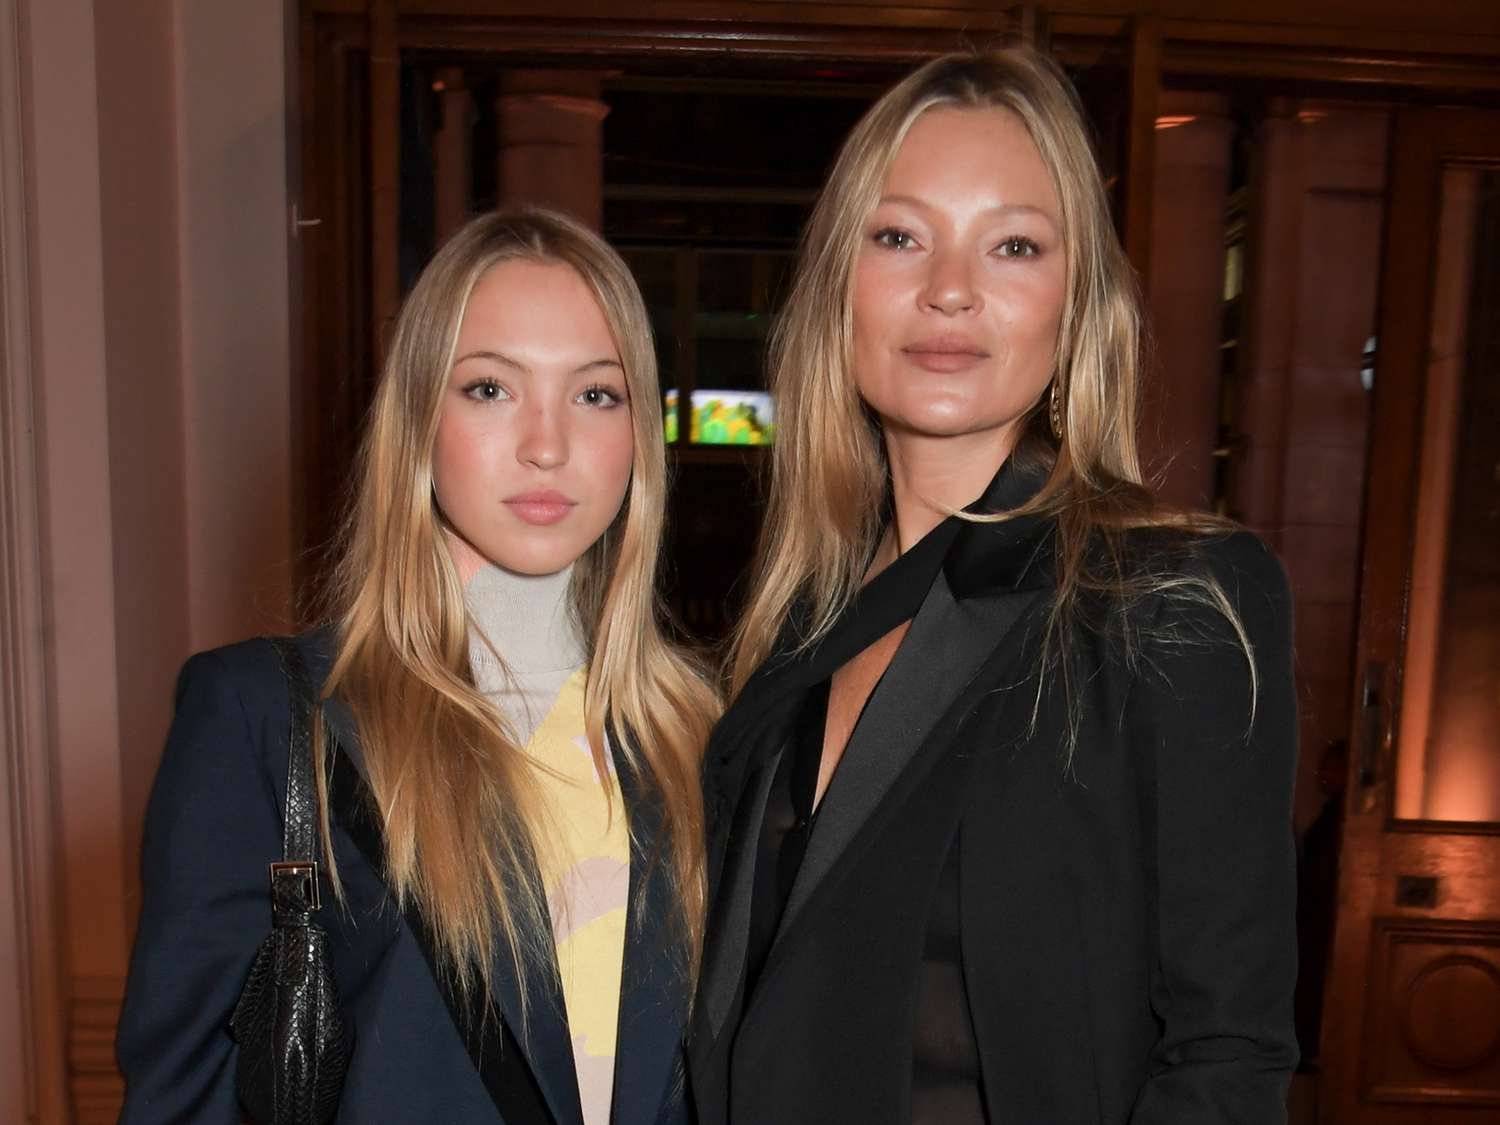 Lila Moss and Kate Moss attend 'The Fendi Set' book launch event at the Royal Academy of Arts on February 08, 2022 in London, England